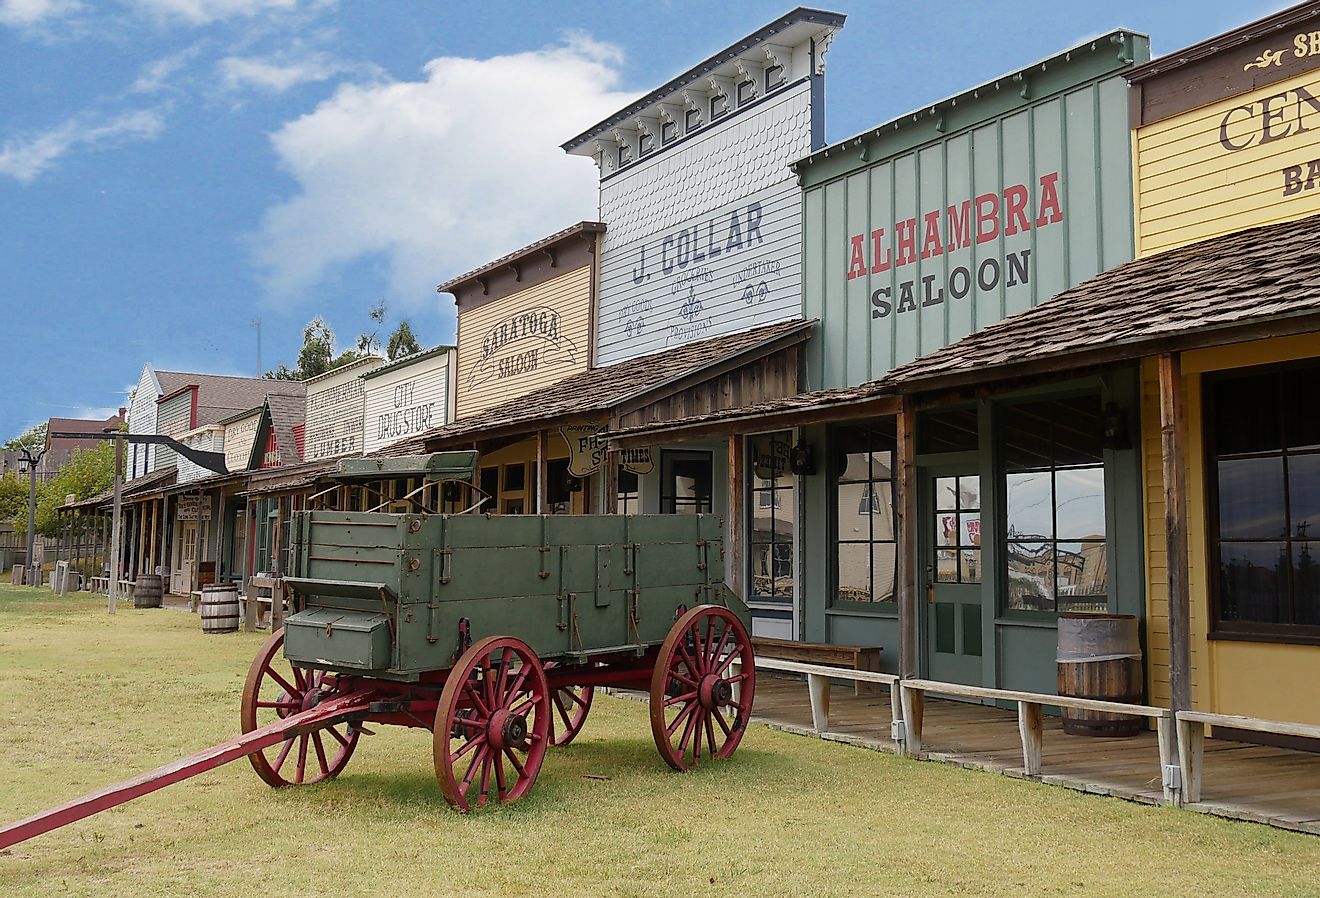 Façade of the Front Street replica with an old chuck wagon at the Boot Hill historical museum in Dodge City, Kansas. Image credit RaksyBH via Shutterstock